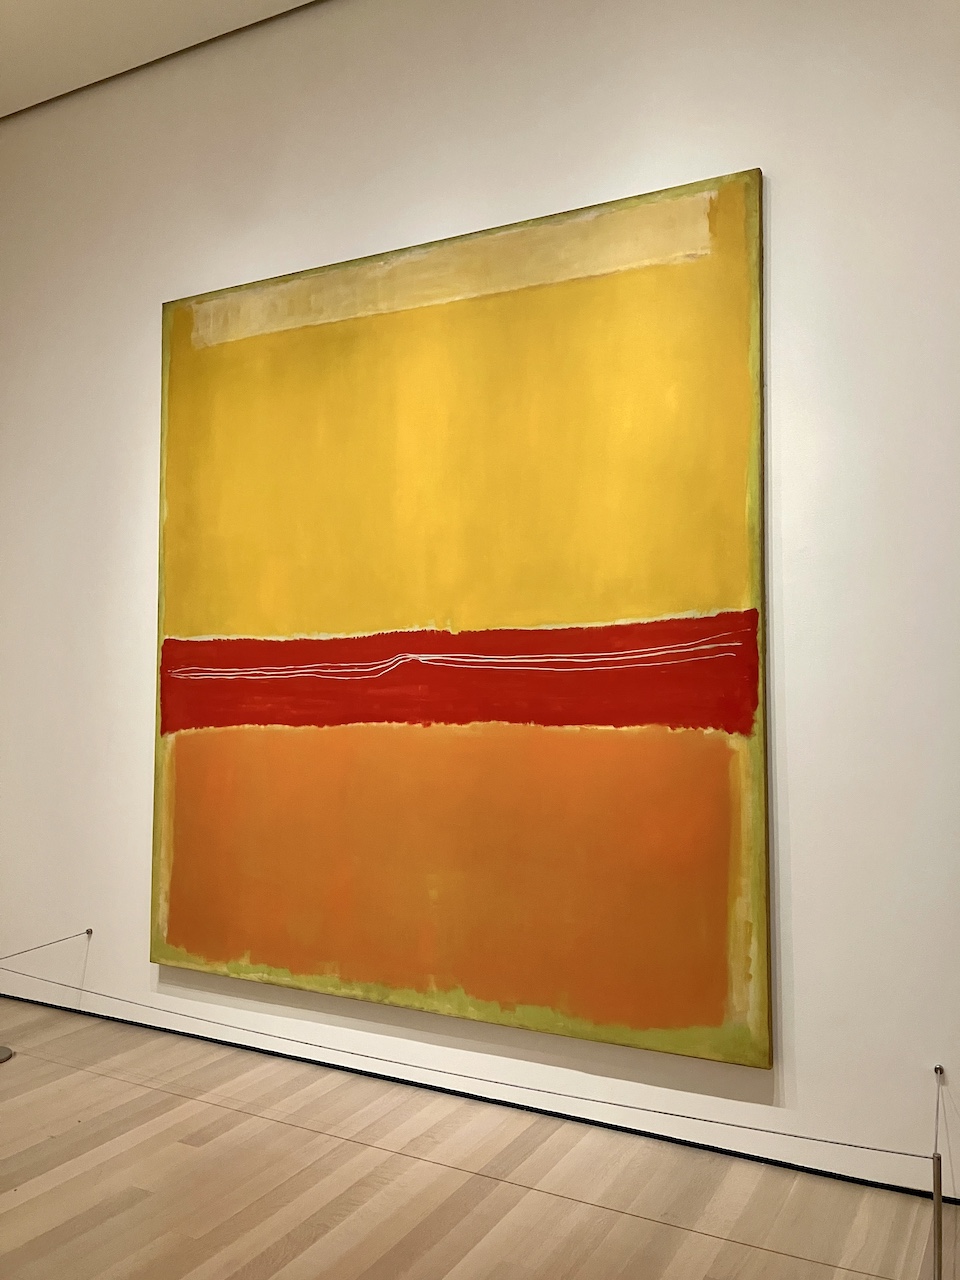 Mark Rothko colour field painting at MoMA, Museum of Modern Art, New York | photo By Kerwin